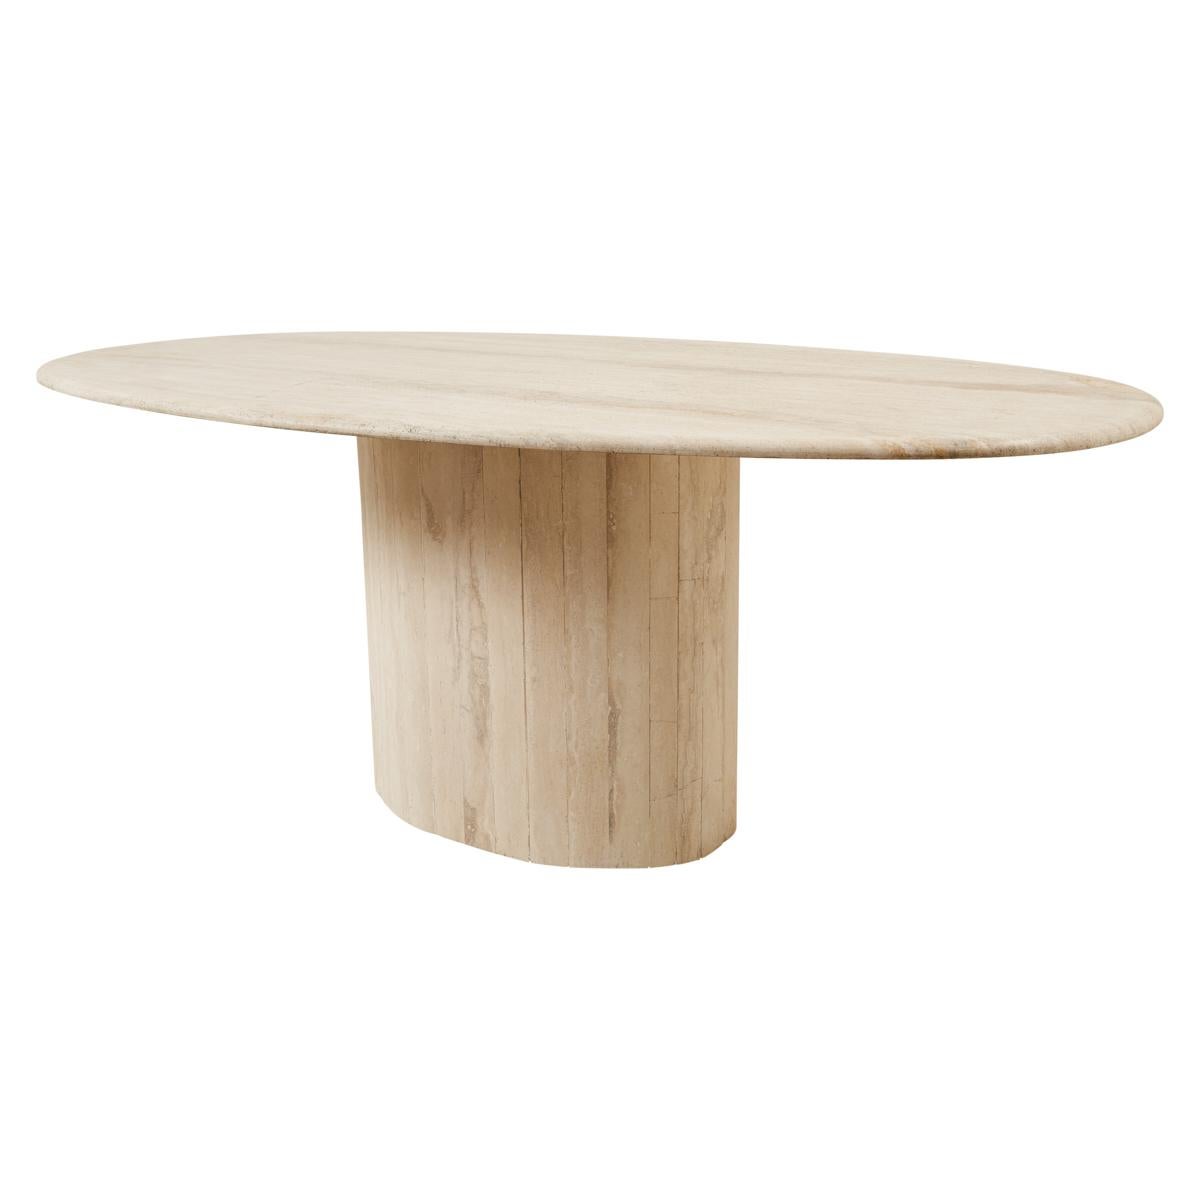 This stunning 1970s French dining table features a travertine oval top and pedestal base. Sleek and modern yet not hard-edged, it has a unique, sculptural presence. This table is a fabulous piece that can comfortably seat six or serve as a statement